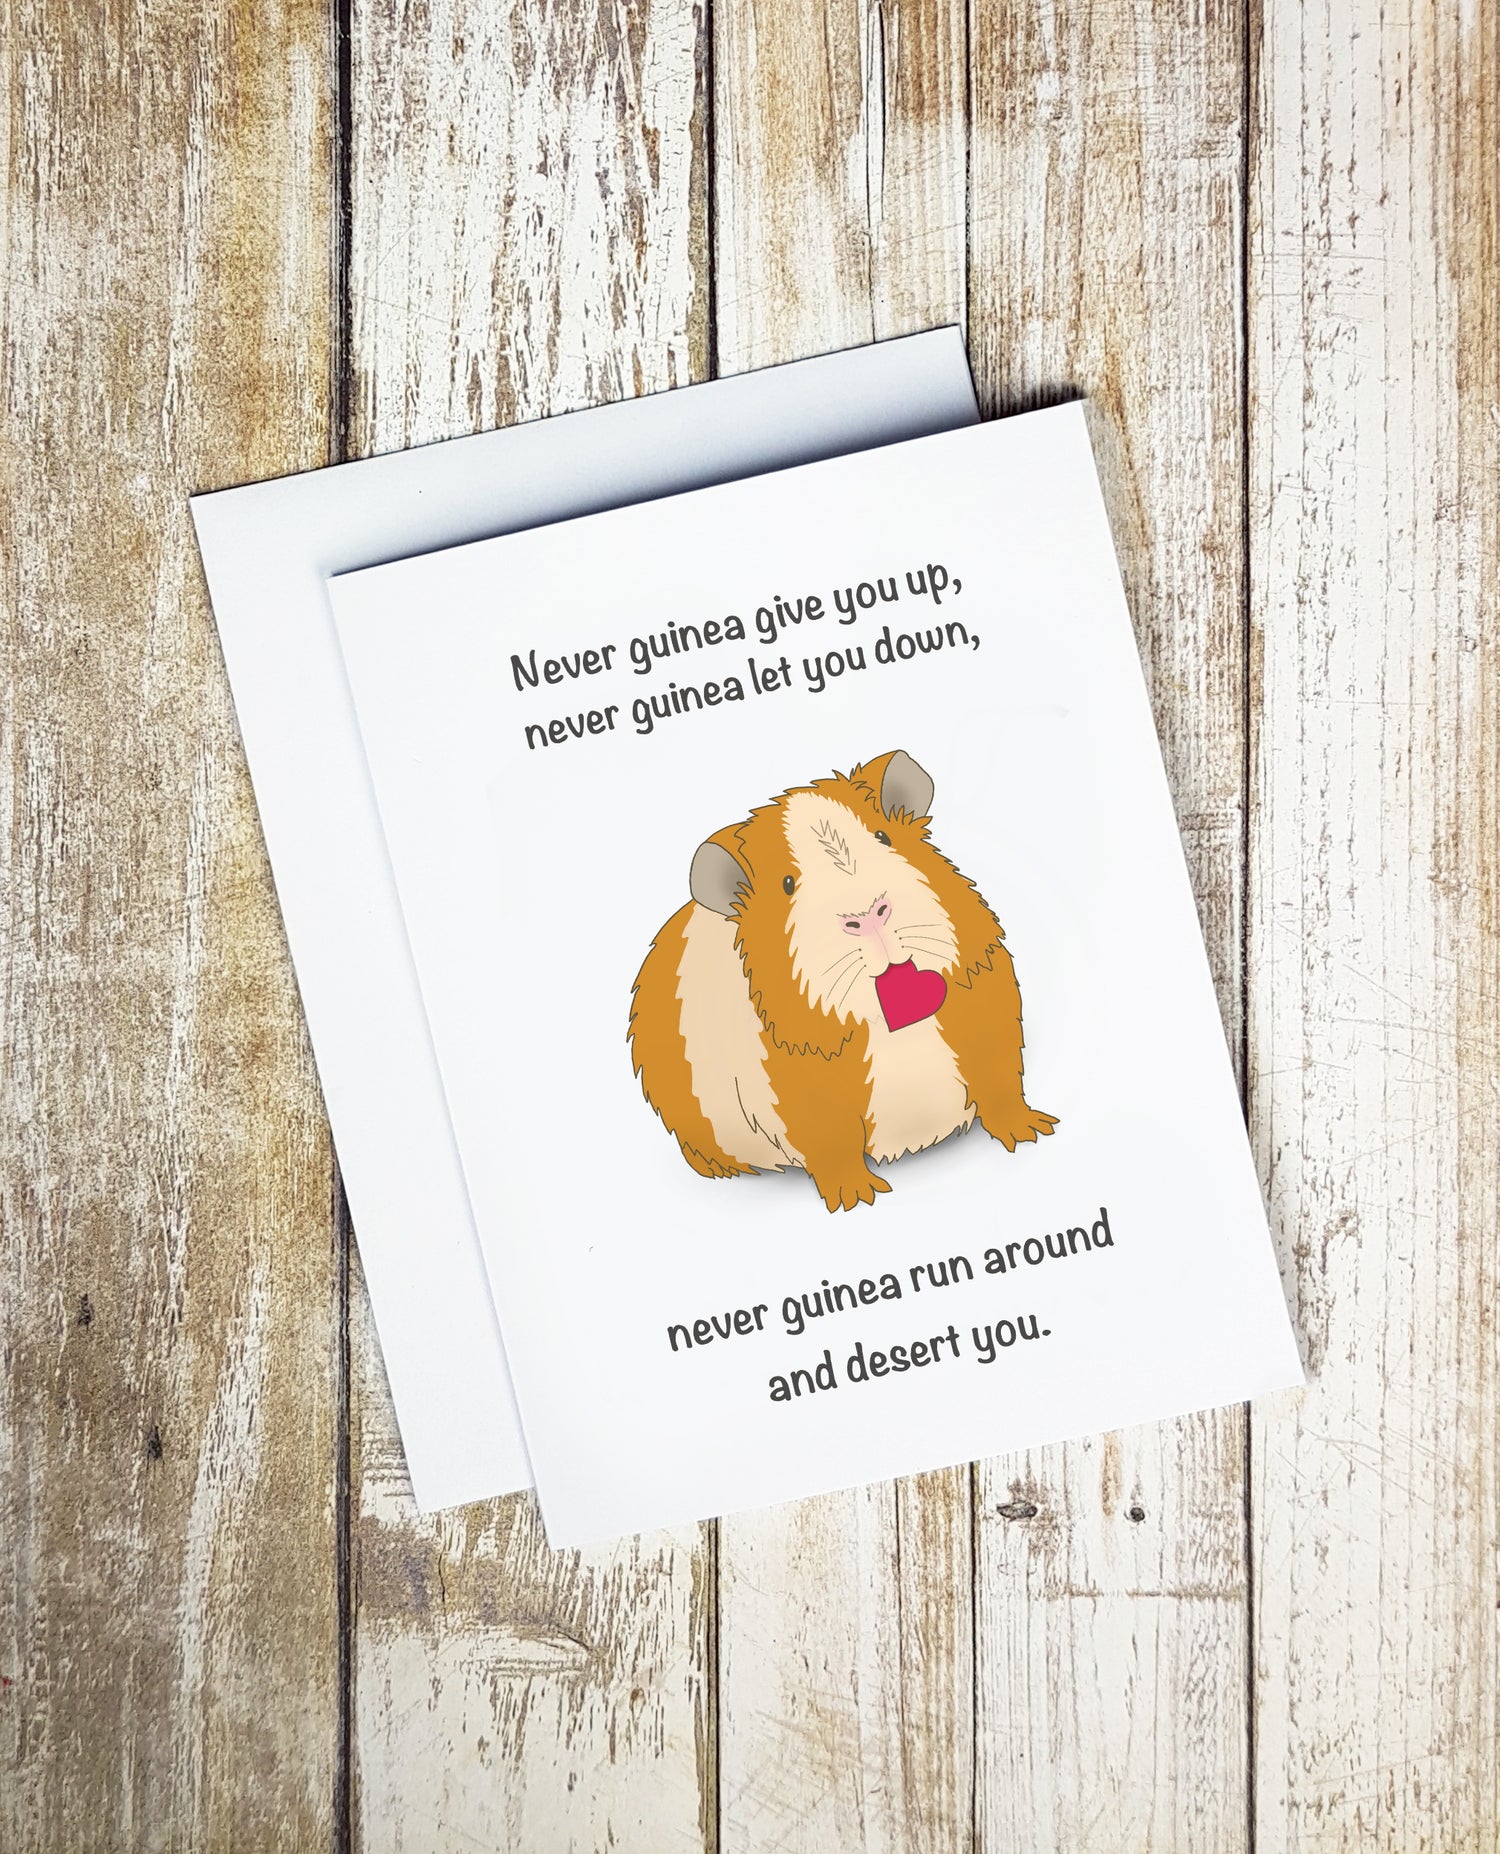 A cute card. It has a cartoon guinea pig on it with a red heart in its mouth. Text on card reads 'Never guinea give you up, never guinea let you down, never guinea run around and desert you.'